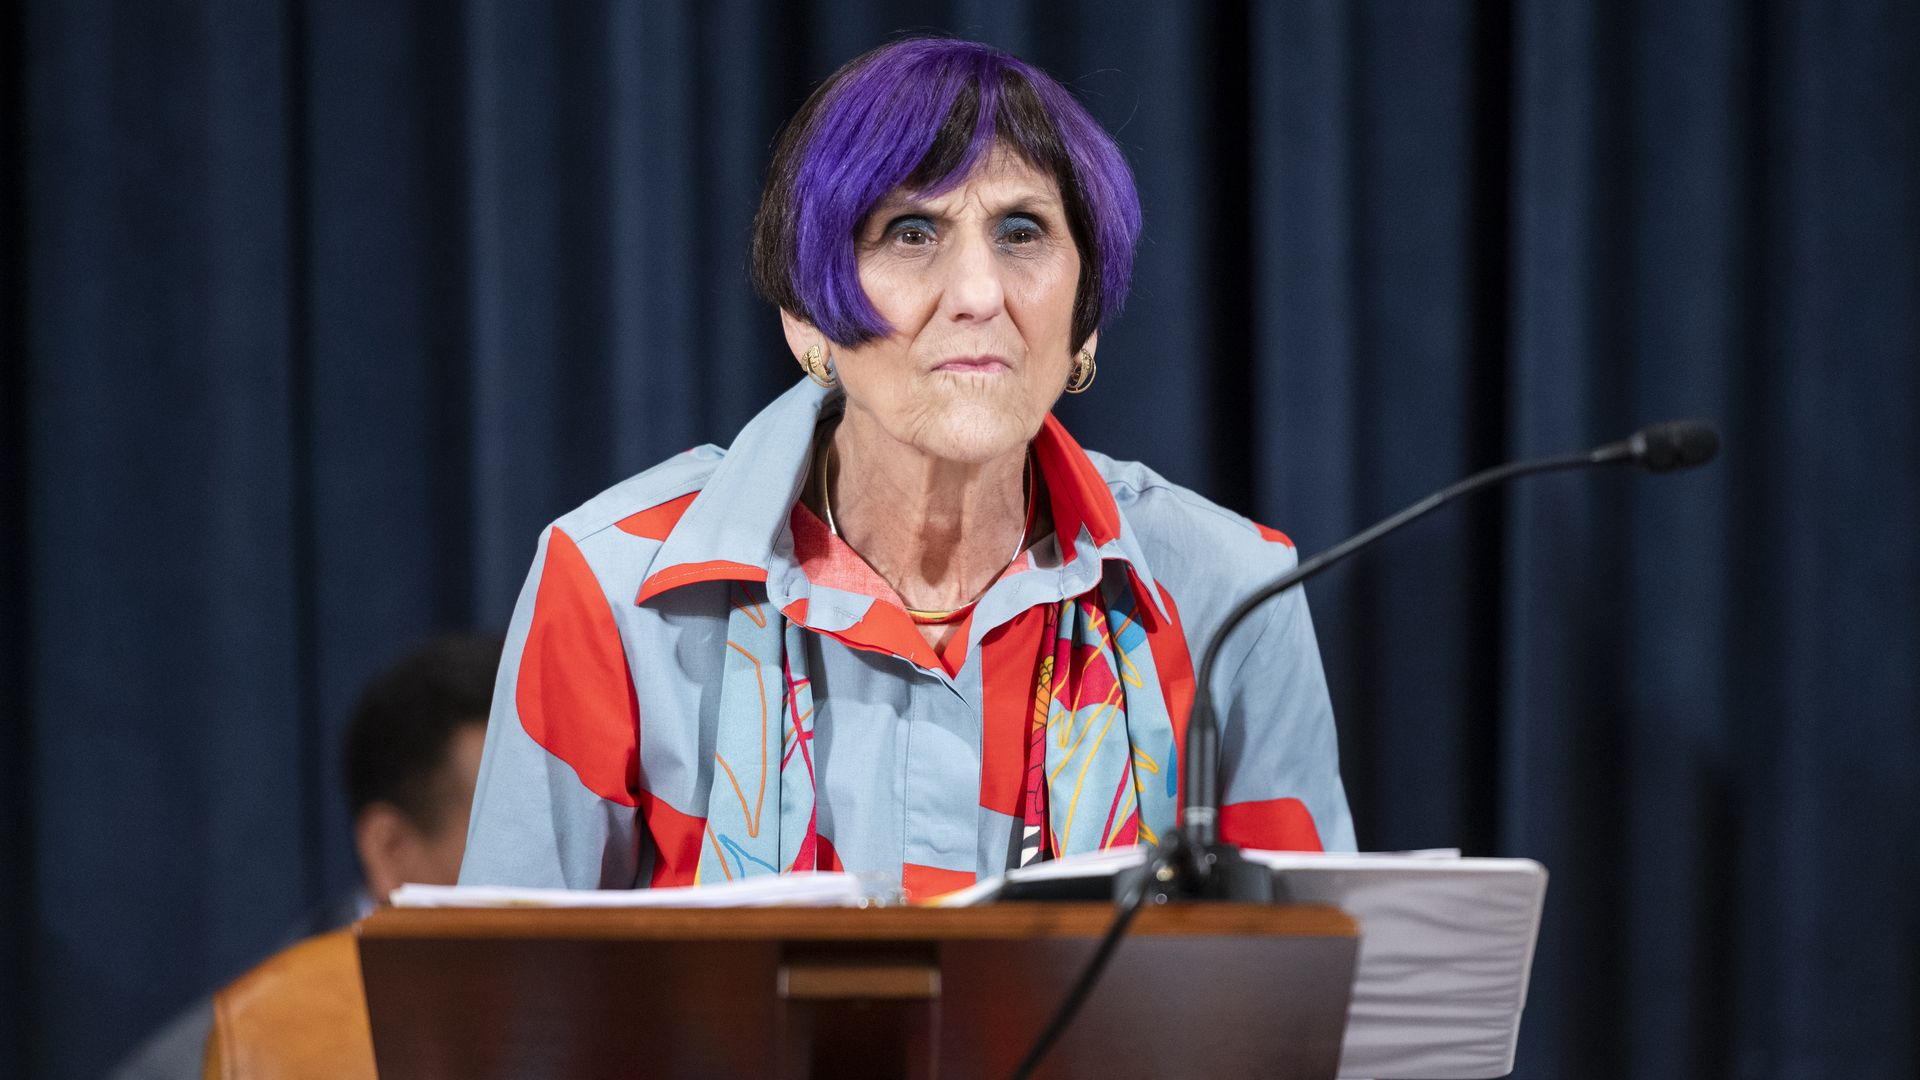  Chairwoman Rosa DeLauro conducts a House Appropriations Committee hearing on Tuesday, June 29